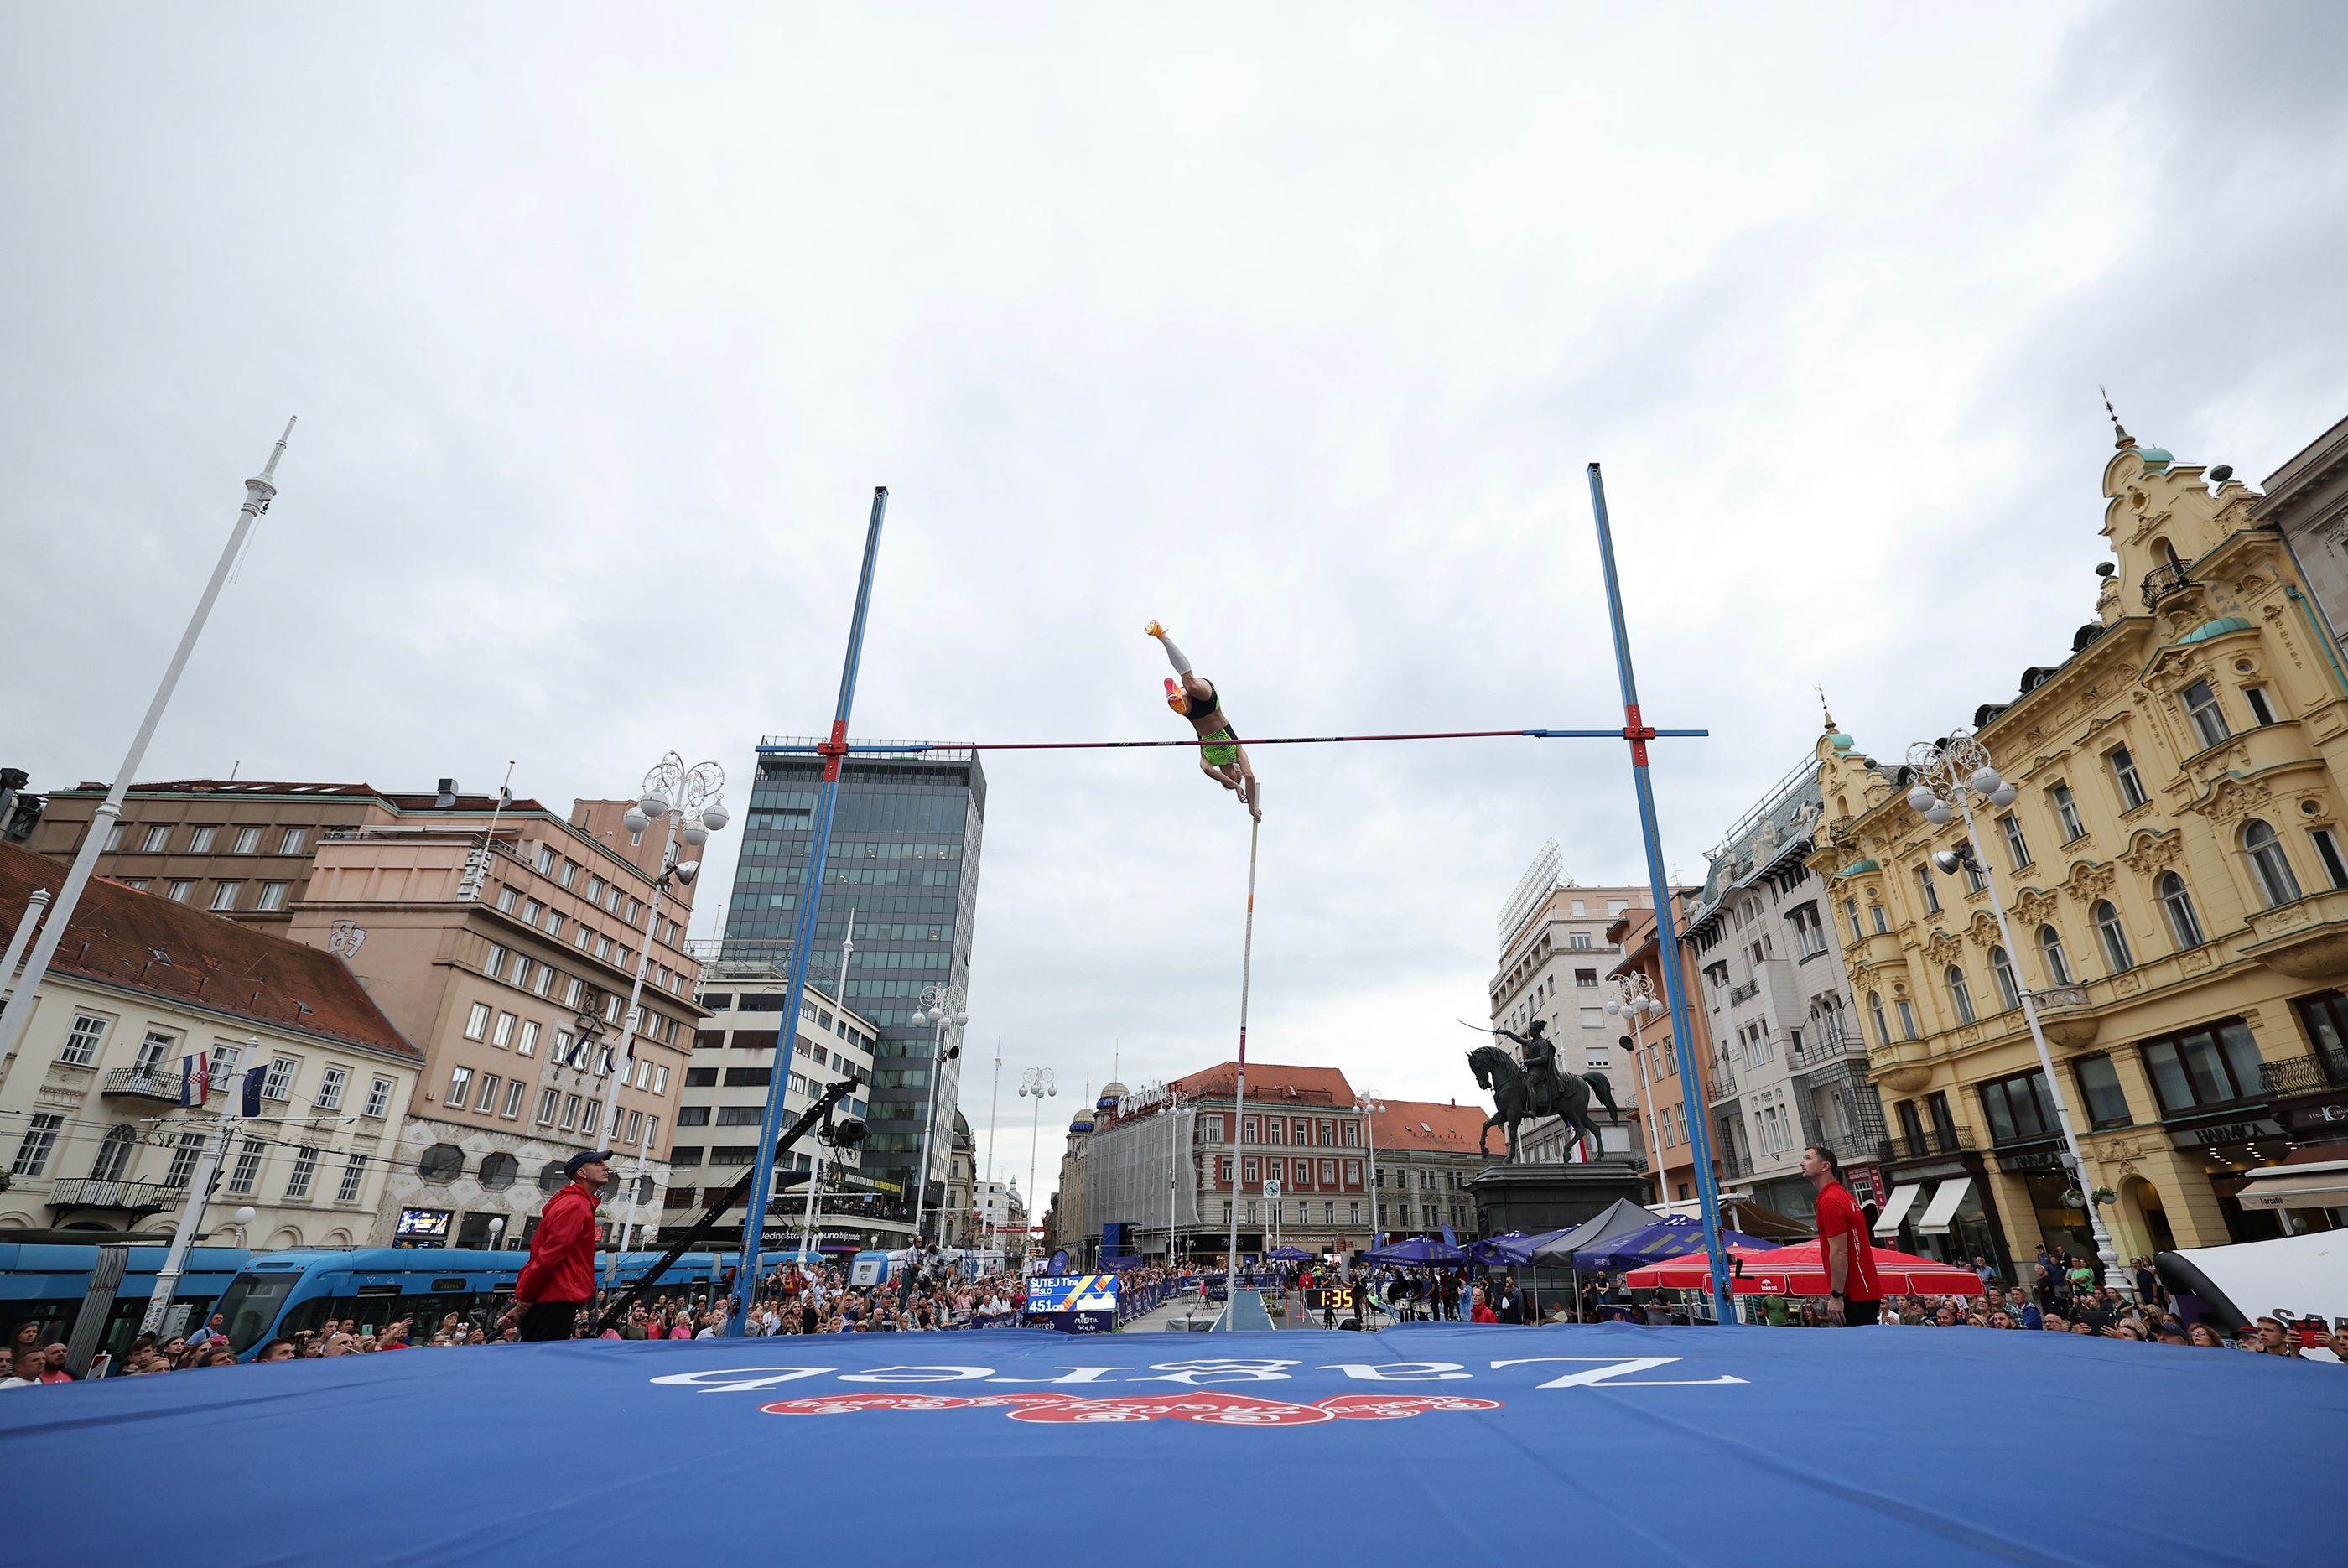 Tina Sutej competes in the city centre pole vault at the World Athletics Continental Tour Gold meeting in Zagreb